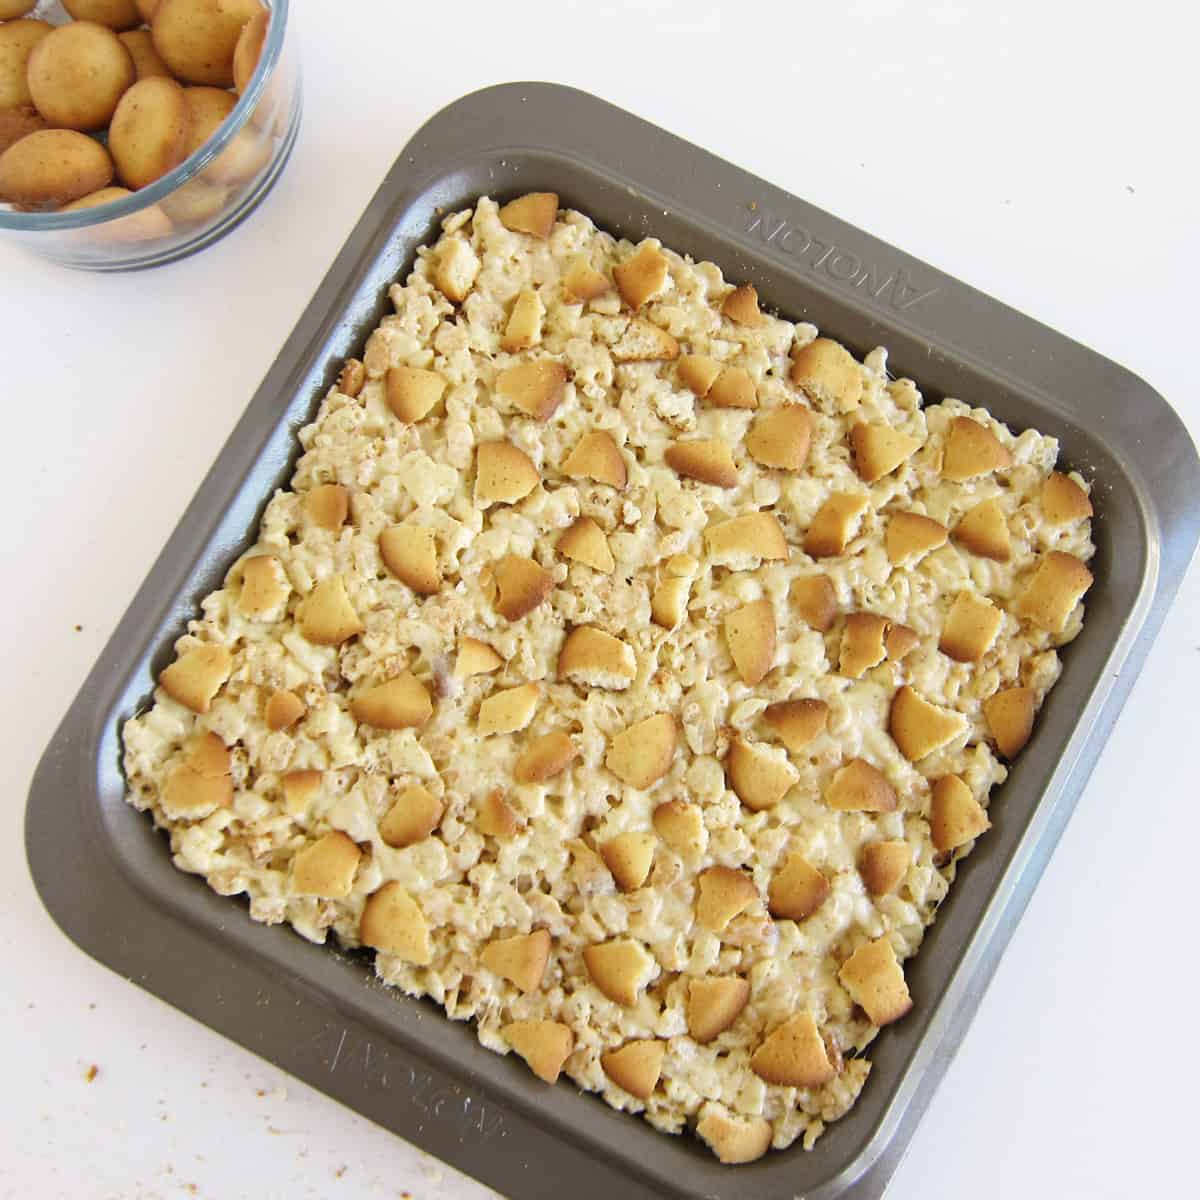 vanilla wafer cookie pieces arranged on top of the banana pudding cereal treats in a pan